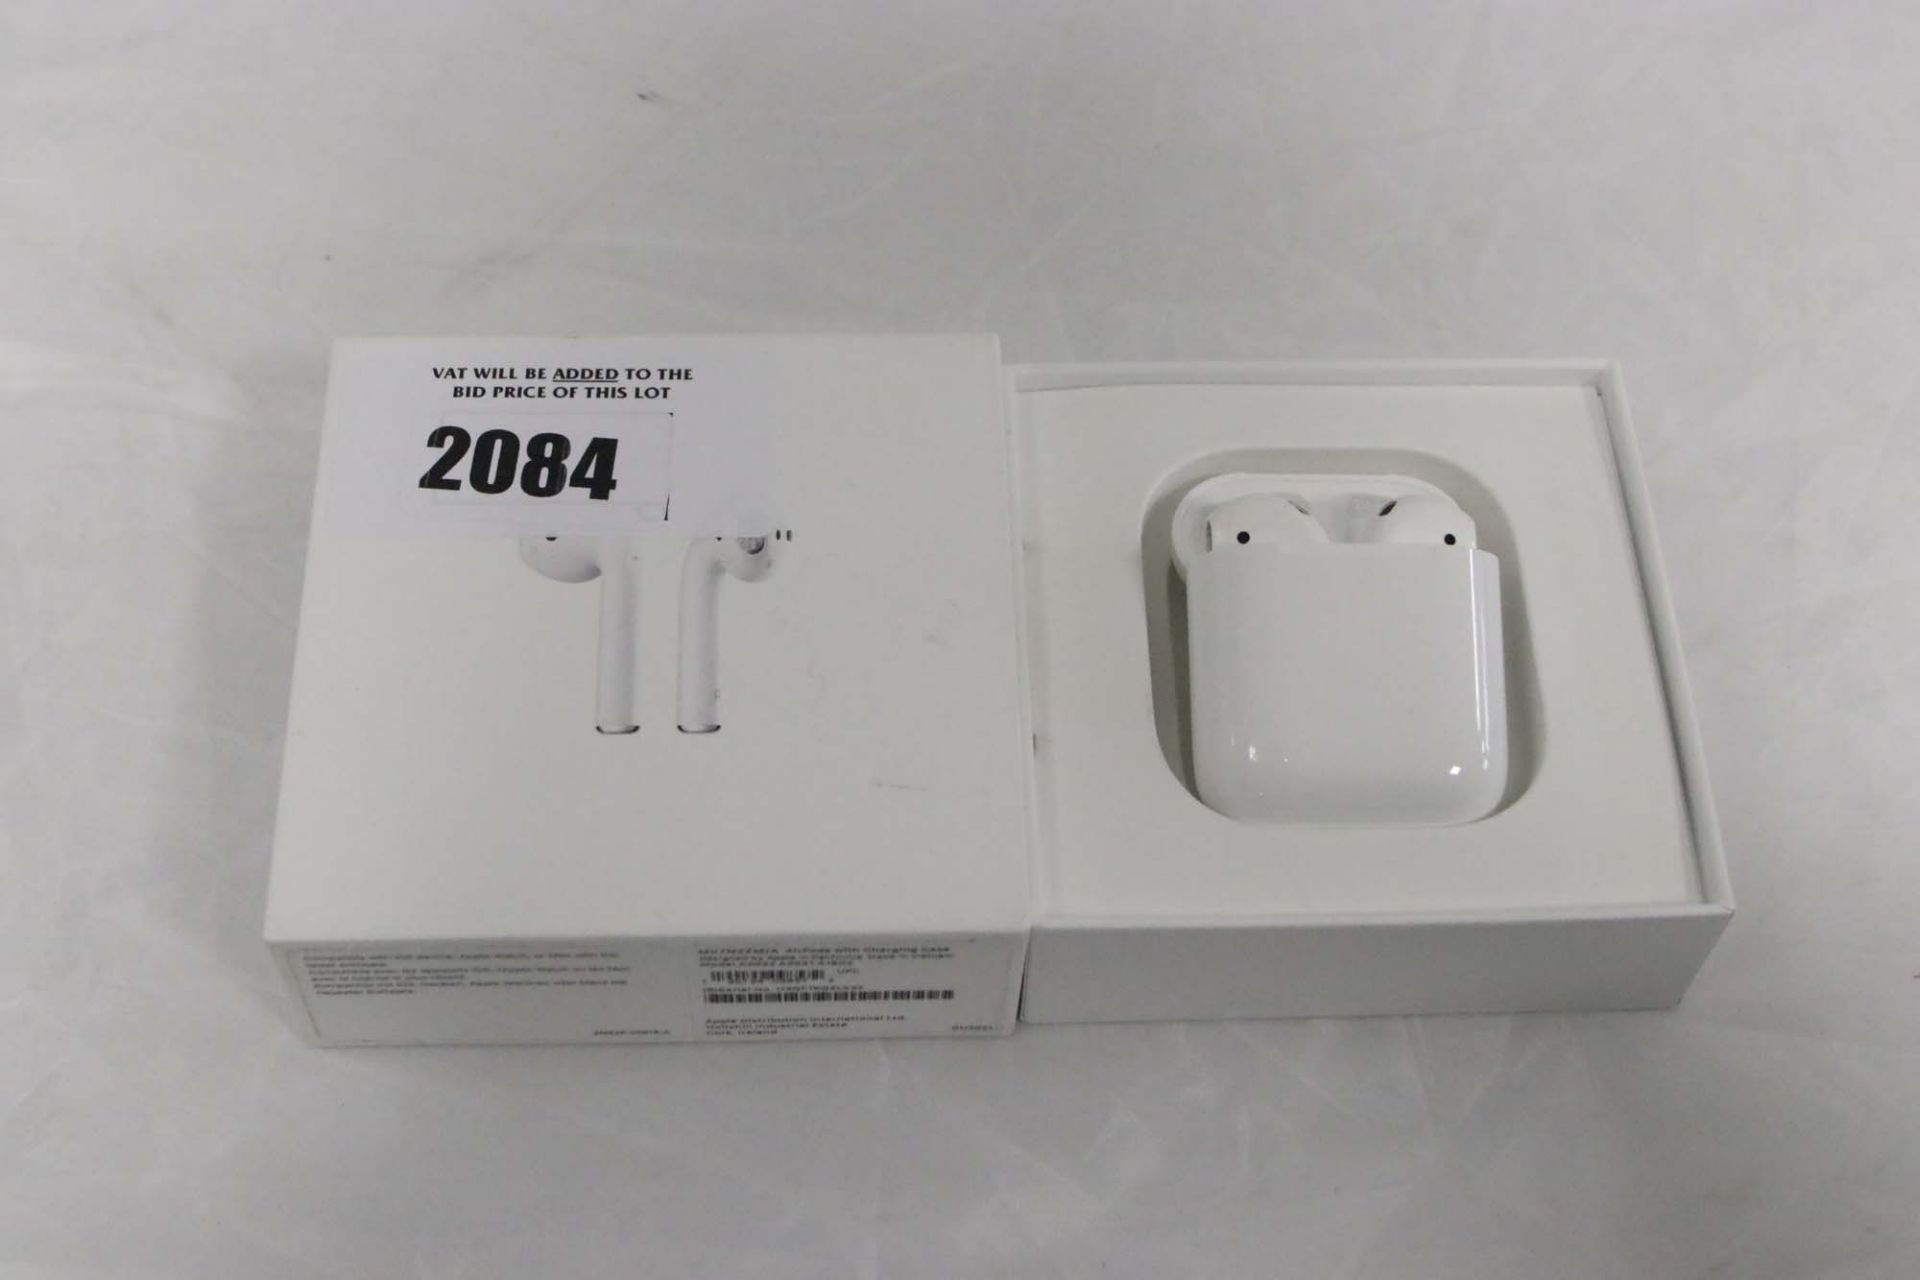 Boxed pair of Apple AirPods 1st gen with charging case